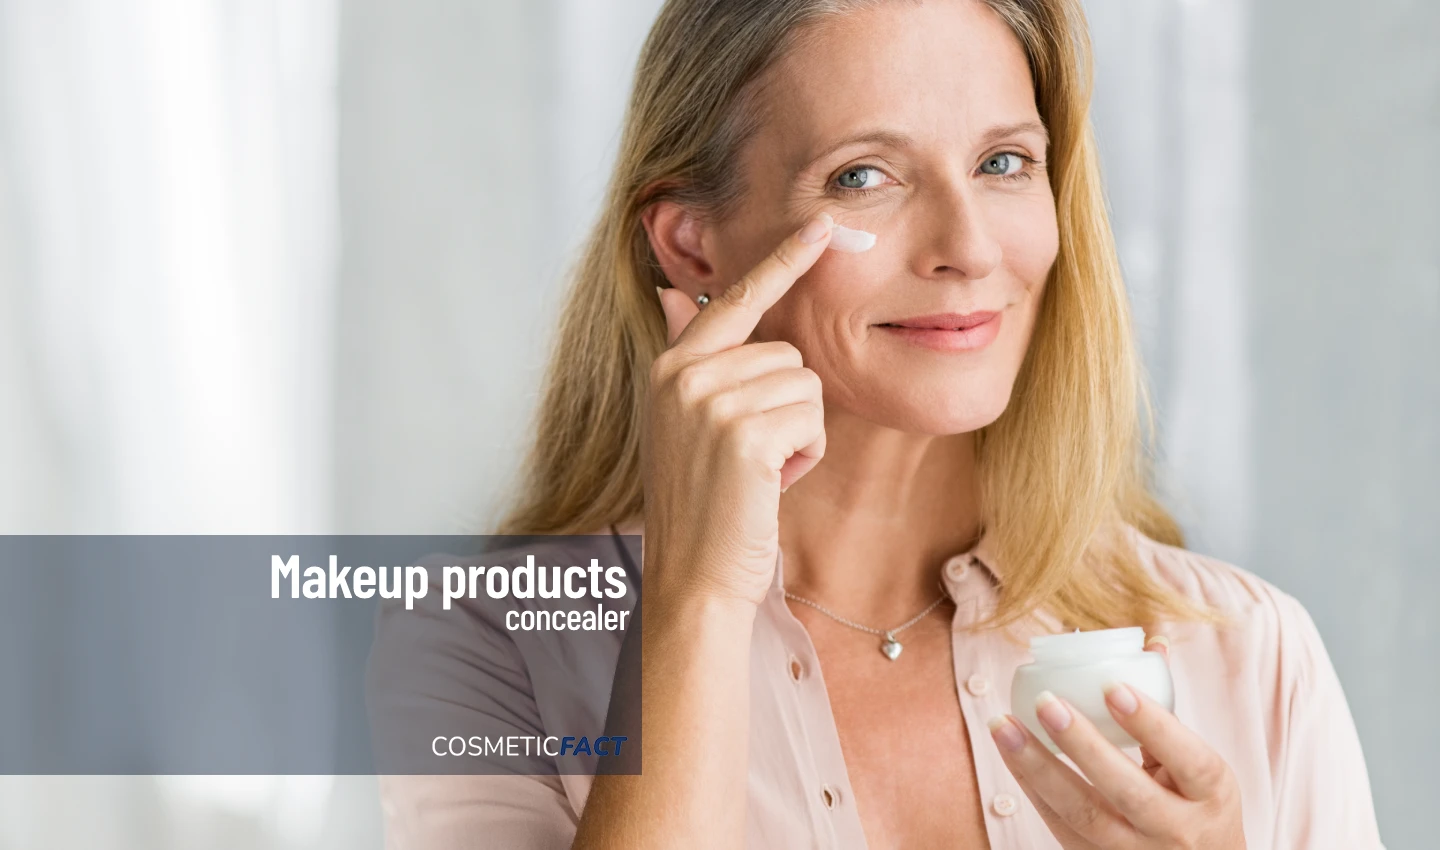 Middle-aged woman applying cream under her eyes for an ageless beauty look, highlighting the importance of choosing the right concealer for mature skin.